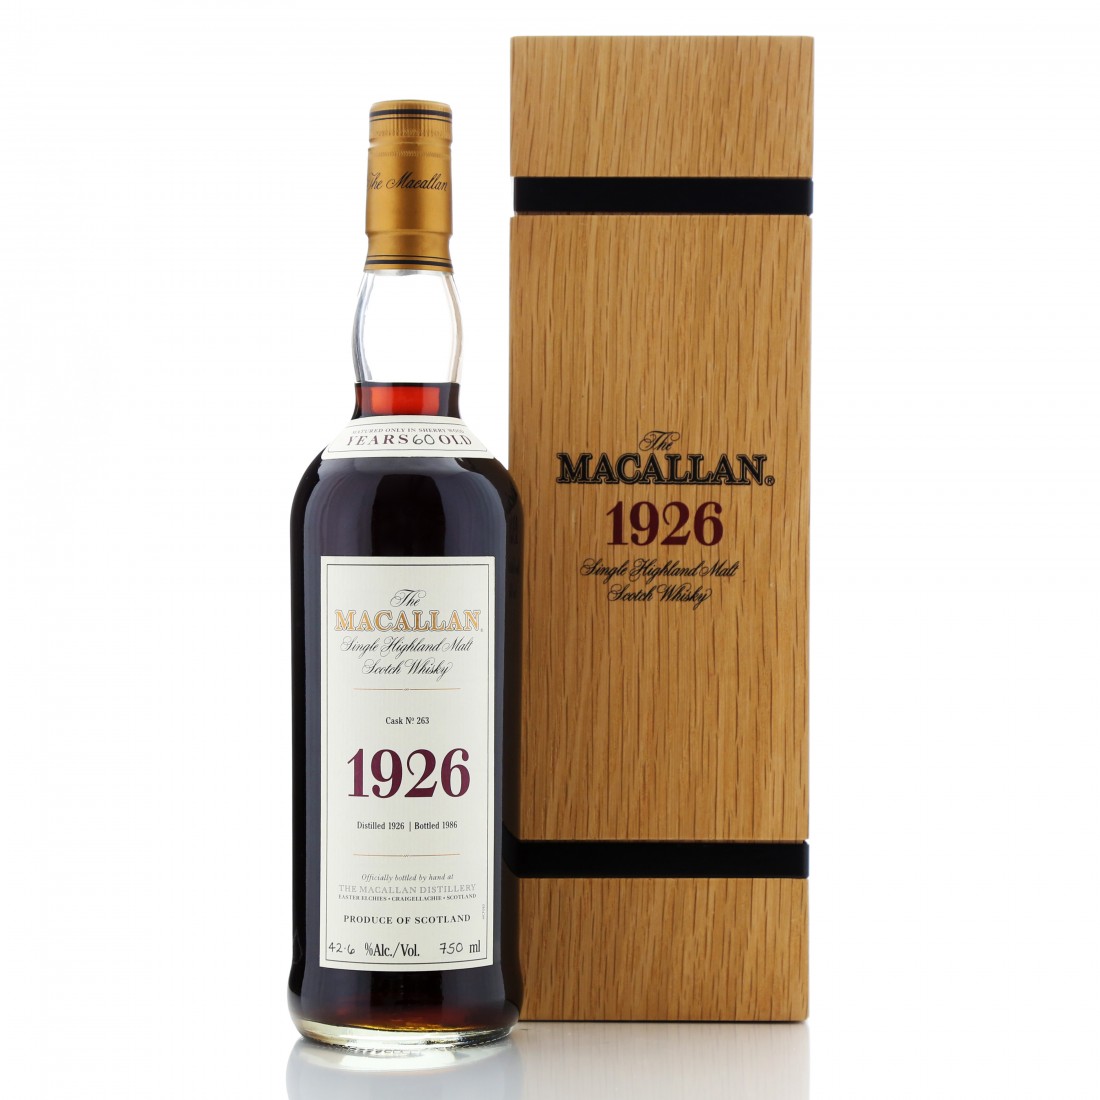 The Macallan 1926 60-Year-Old Fine and Rare